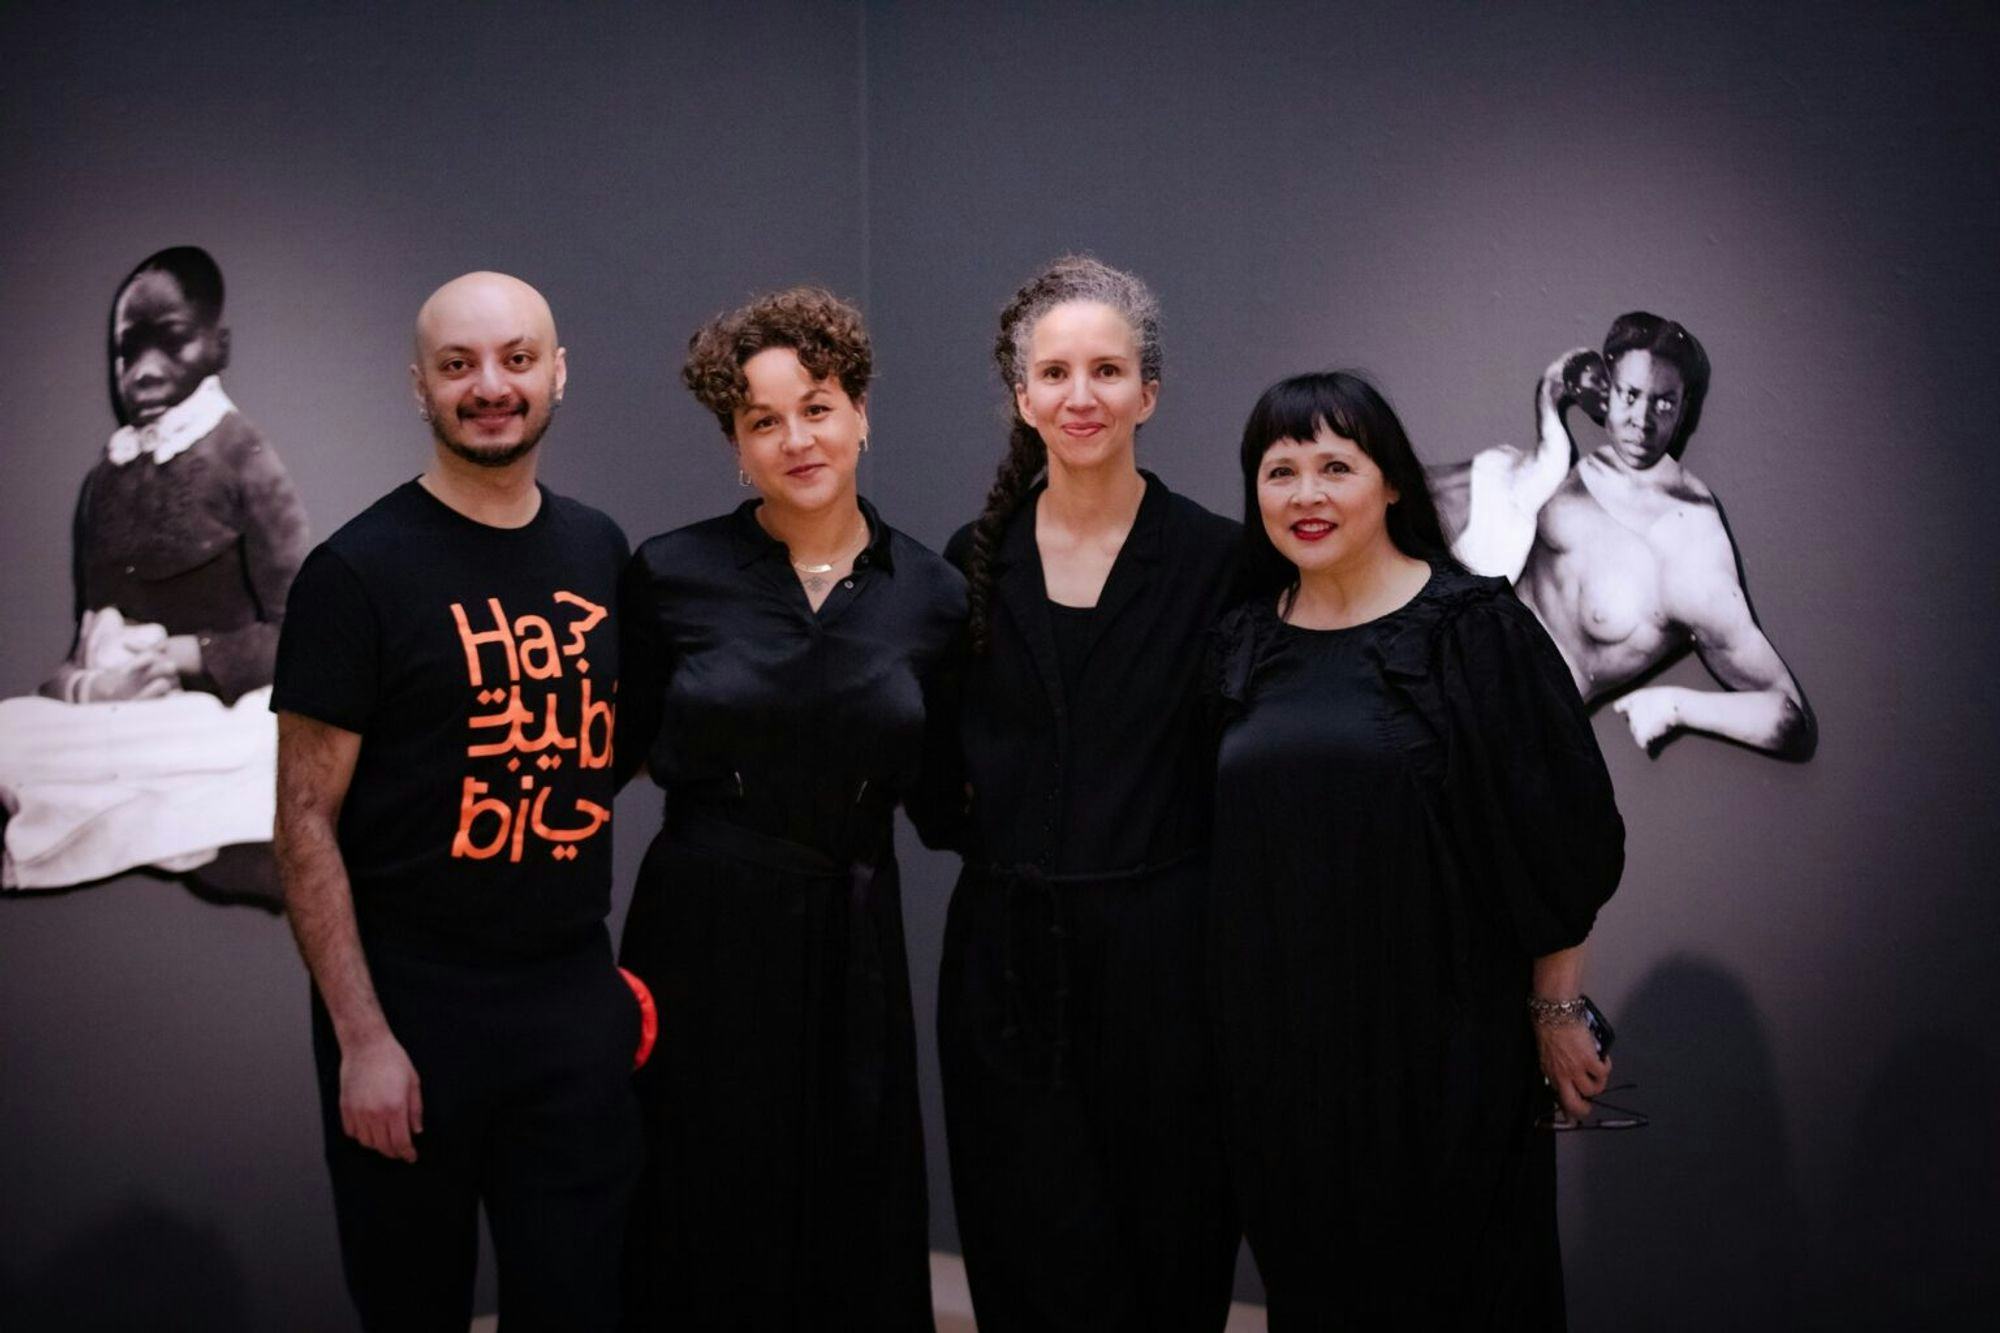 Tracing Fragments. From left to right: Abdullah Qureshi, Daría Sól Andrews, Sasha Huber and Kathy Clark.